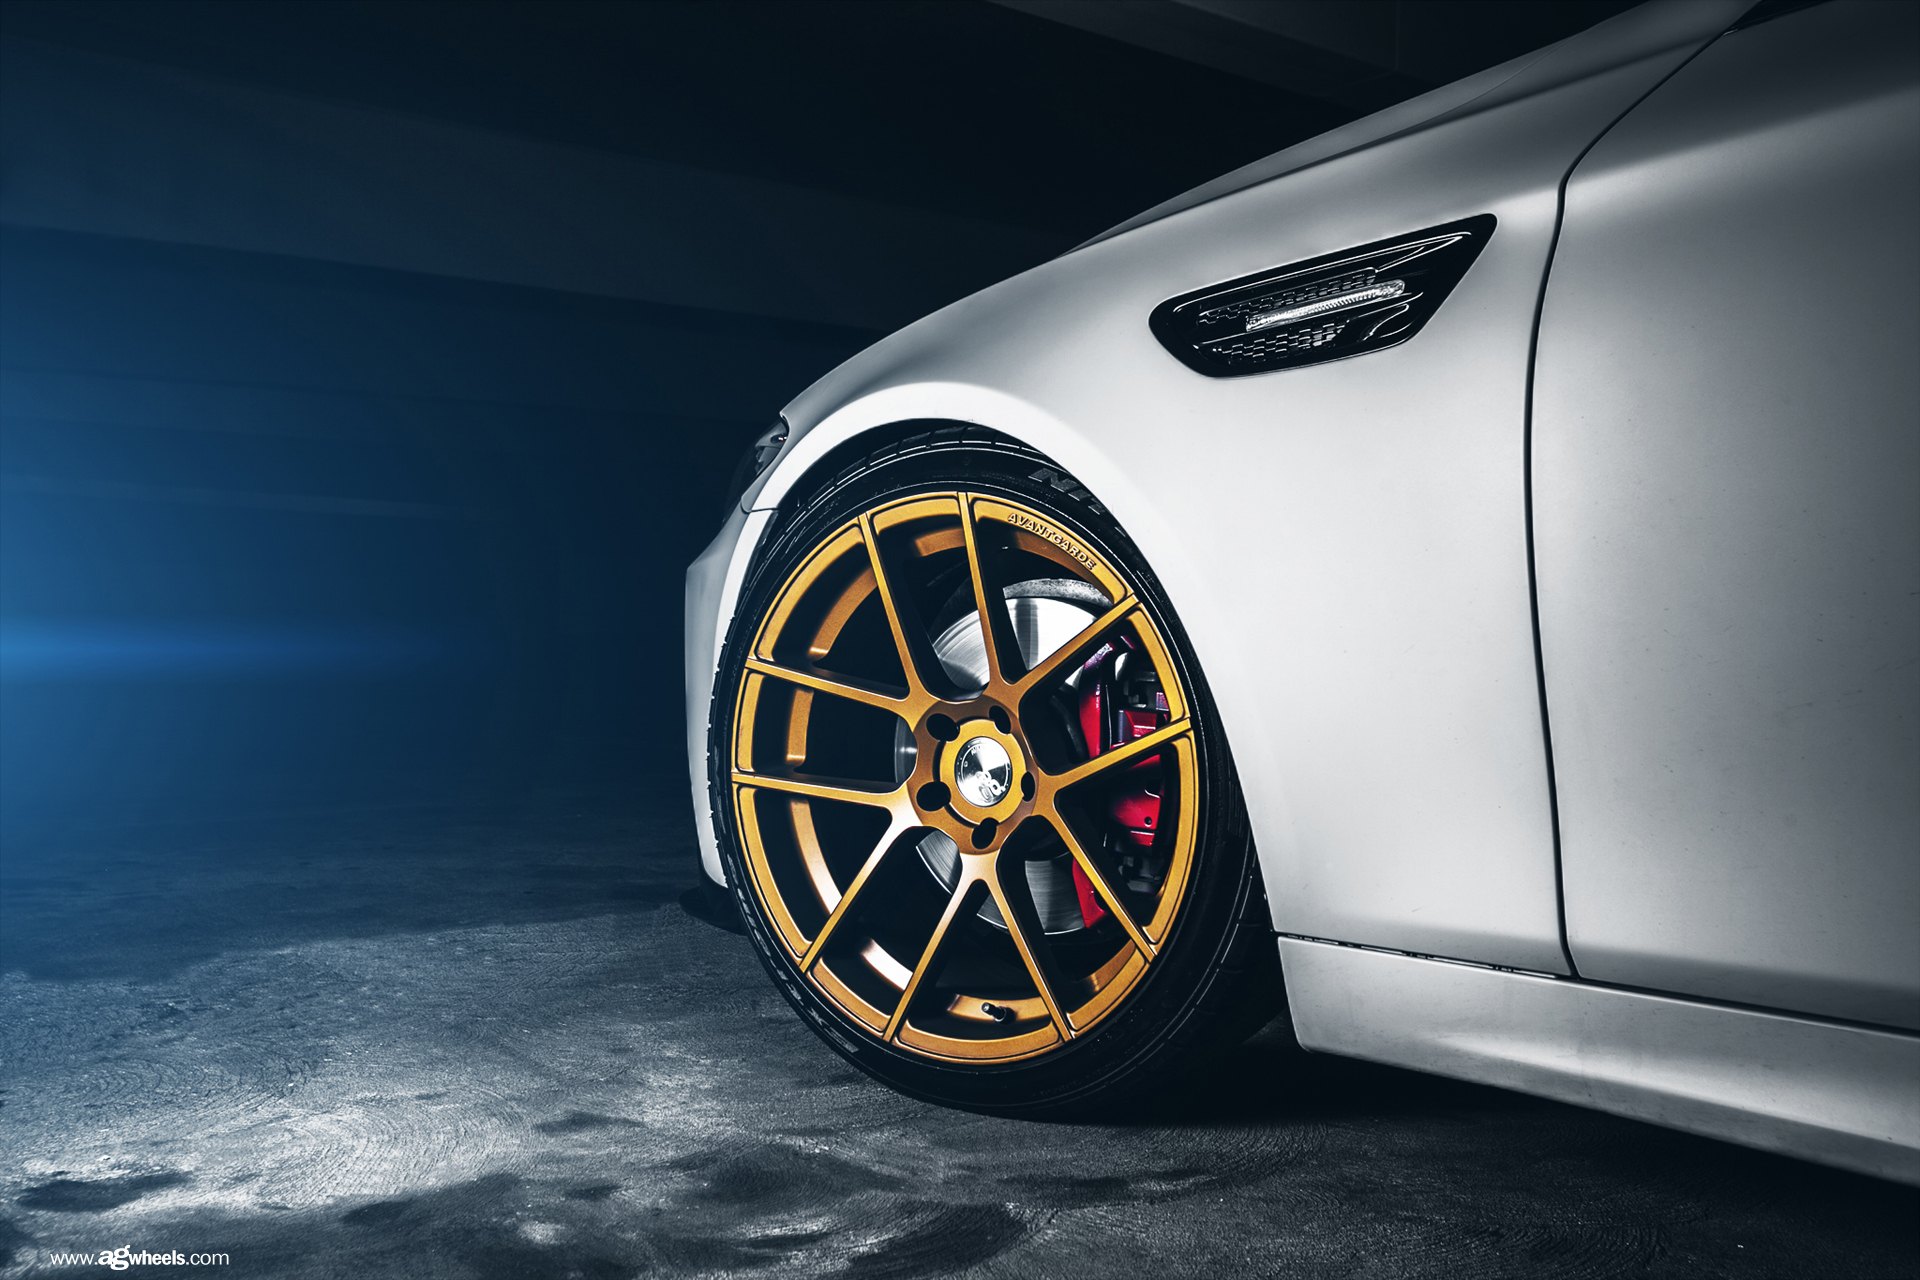 Avant Garde Rims with Red Brakes on BMW 5-Series - Photo by Avant Garde Wheels